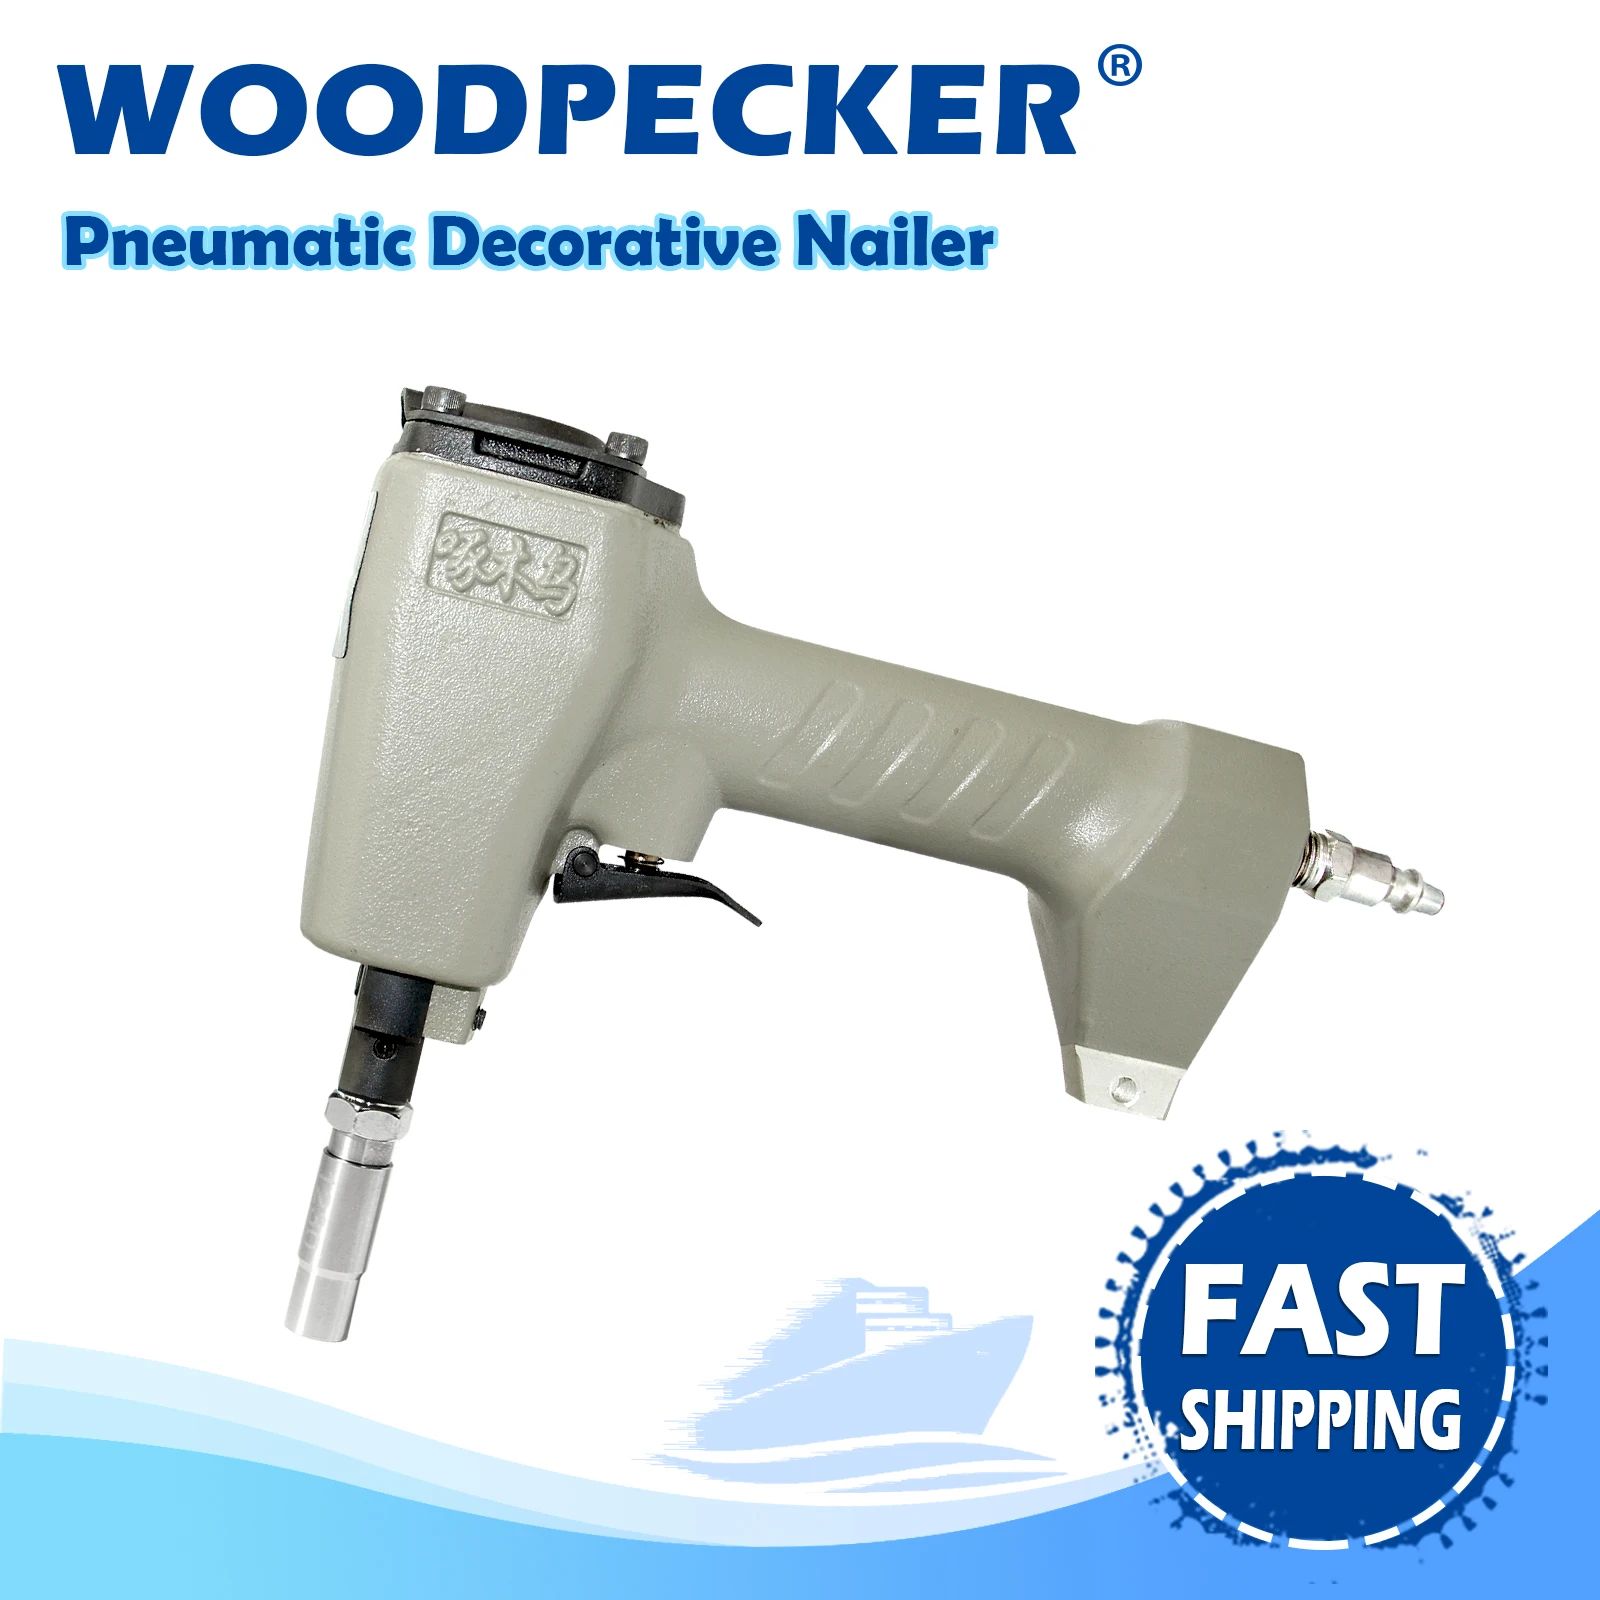 WOODPECKER TU1230 Pneumatic Tool Decorative Nail Gun with Different Size Muzzle Sleeve for Upholstery, Furniture